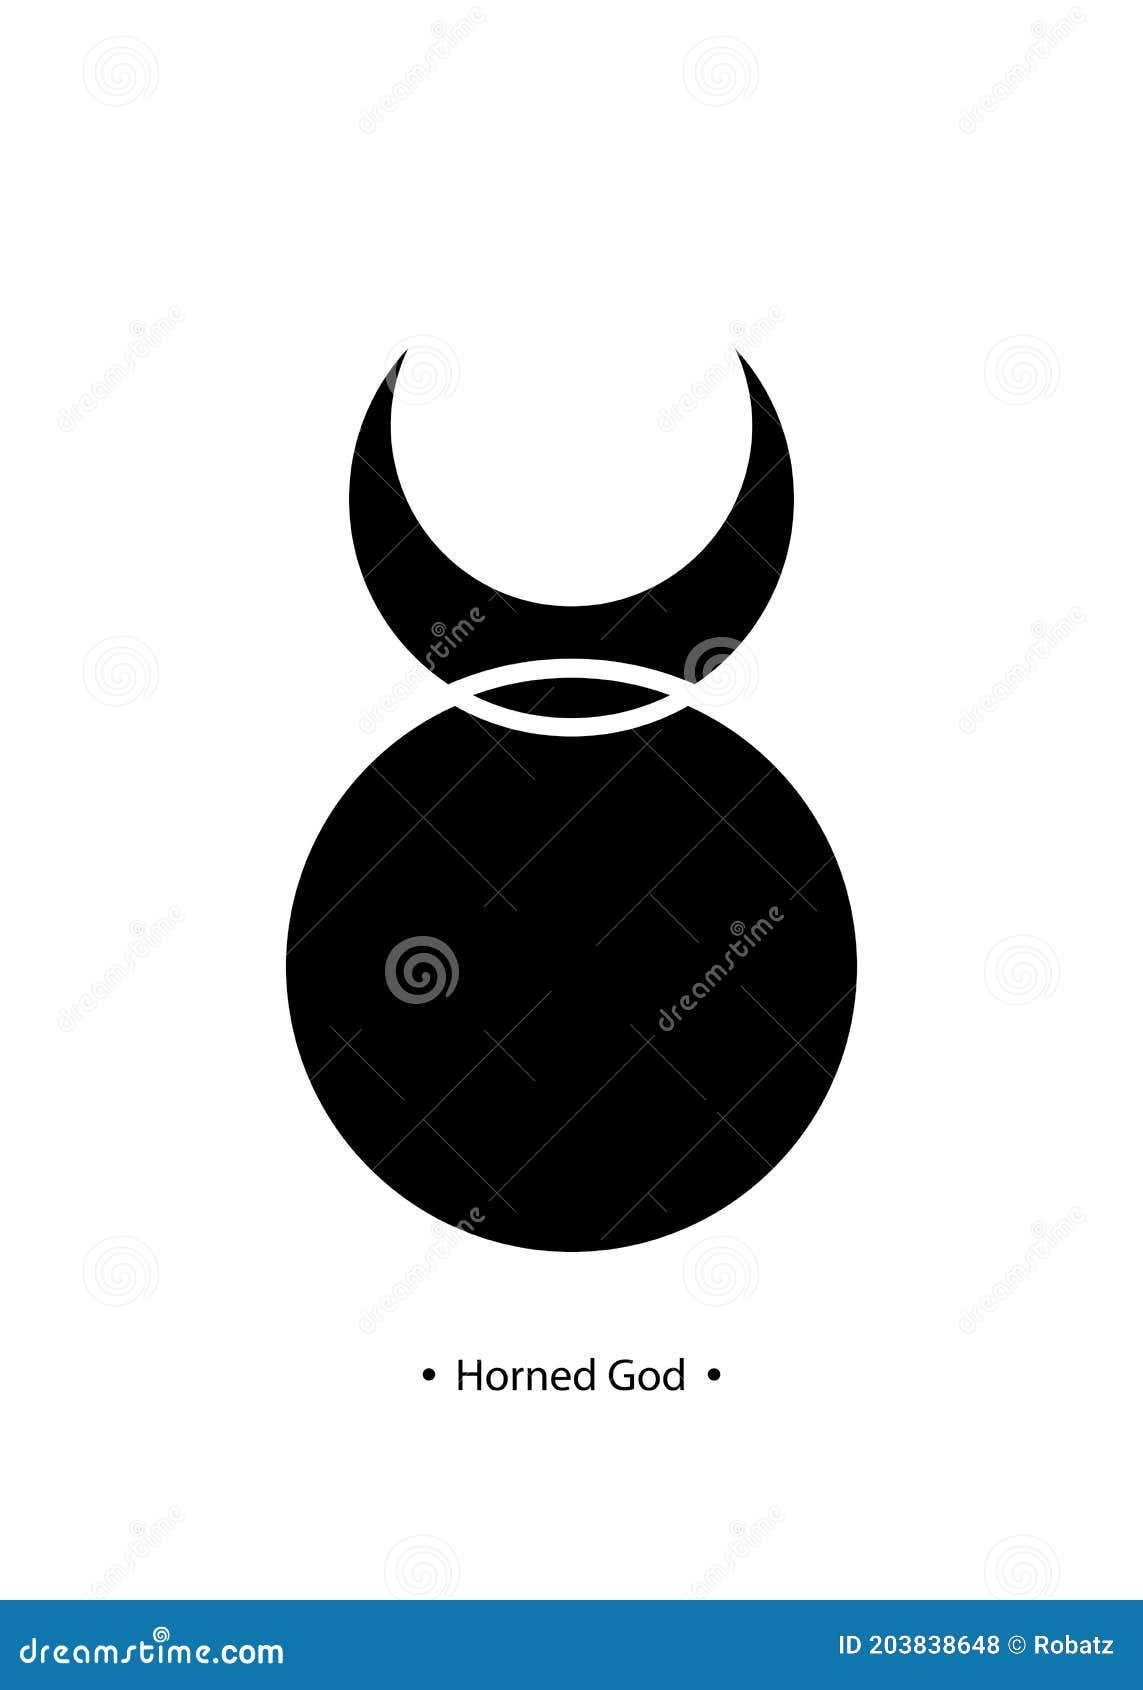 horned god wiccan icon. god of nature, wilderness, sexuality, hunting. wicca deities  consort triple goddess, moon horned